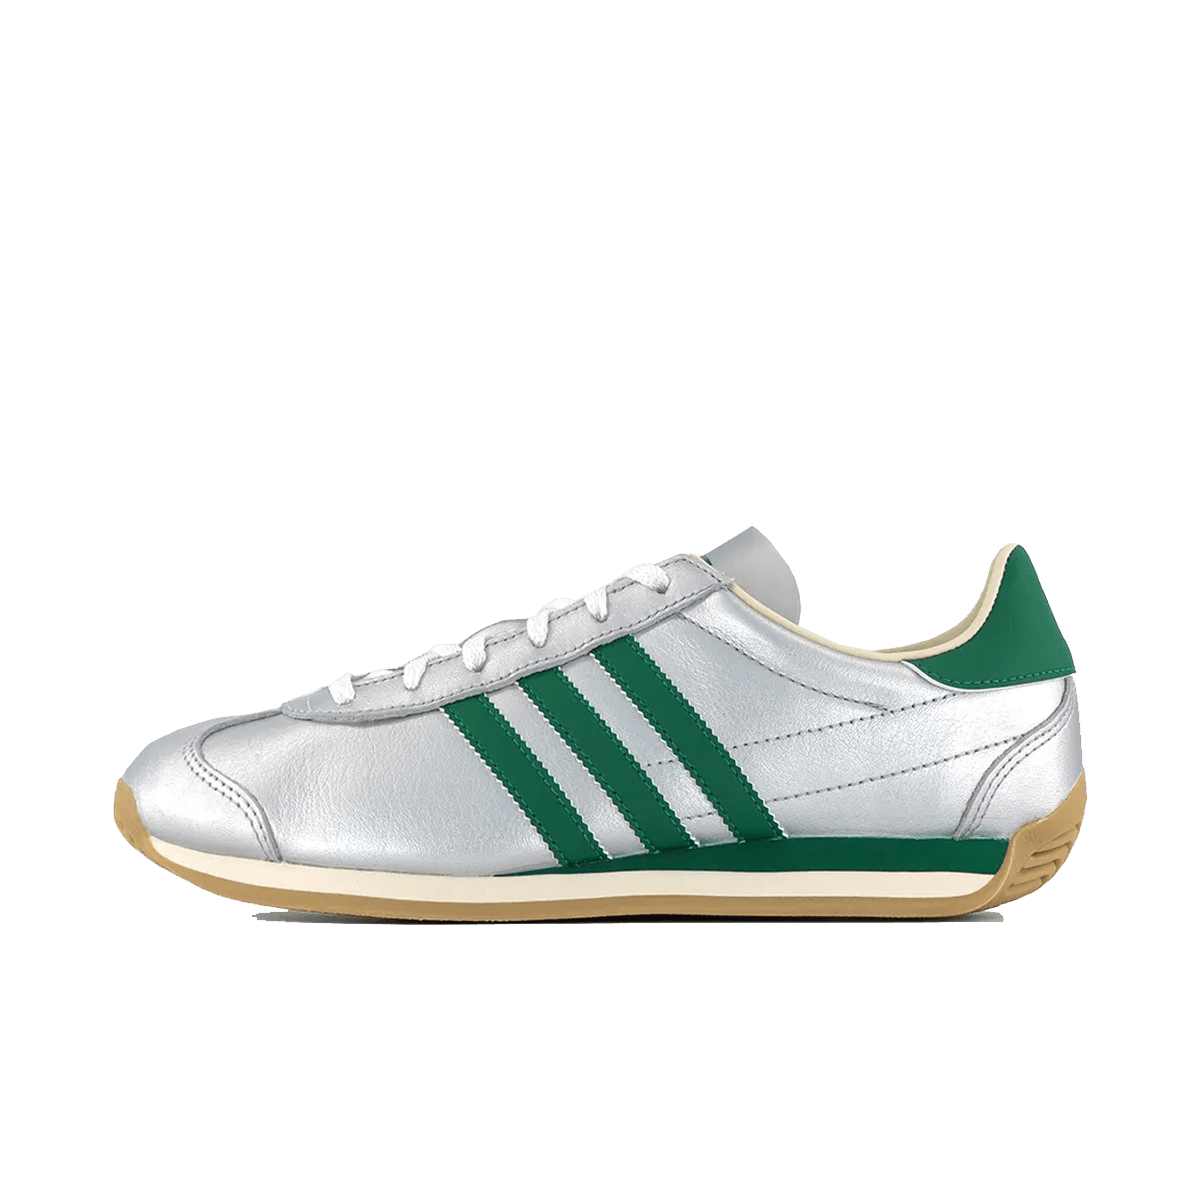 adidas Country OG 'Silver Metallic Green' IE8412